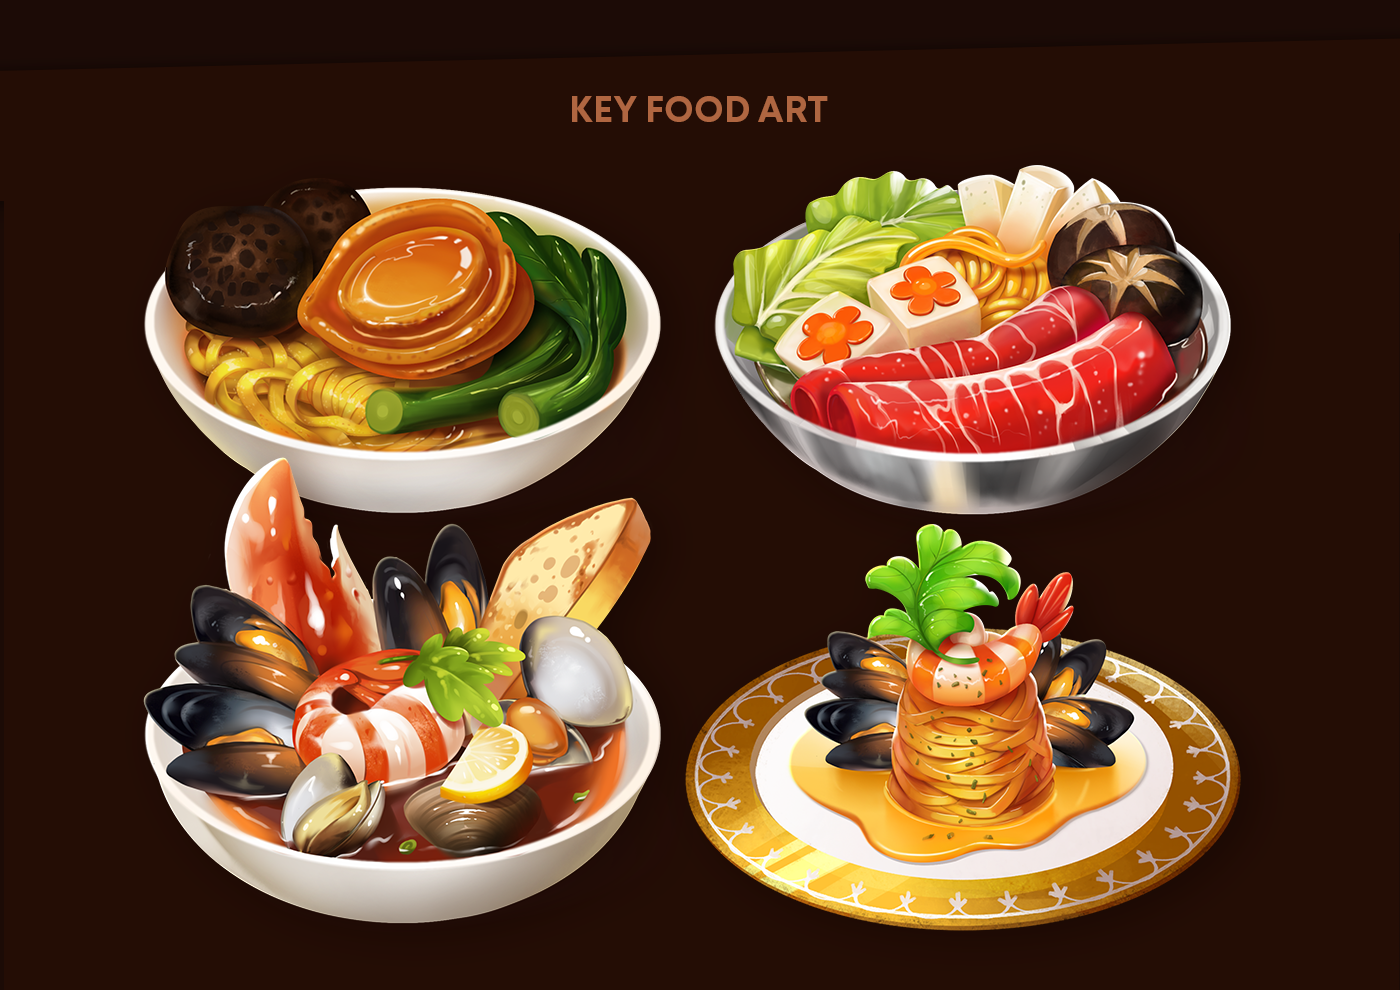 Slots slot casino mobile game chef Food  cooking game design  Game Art